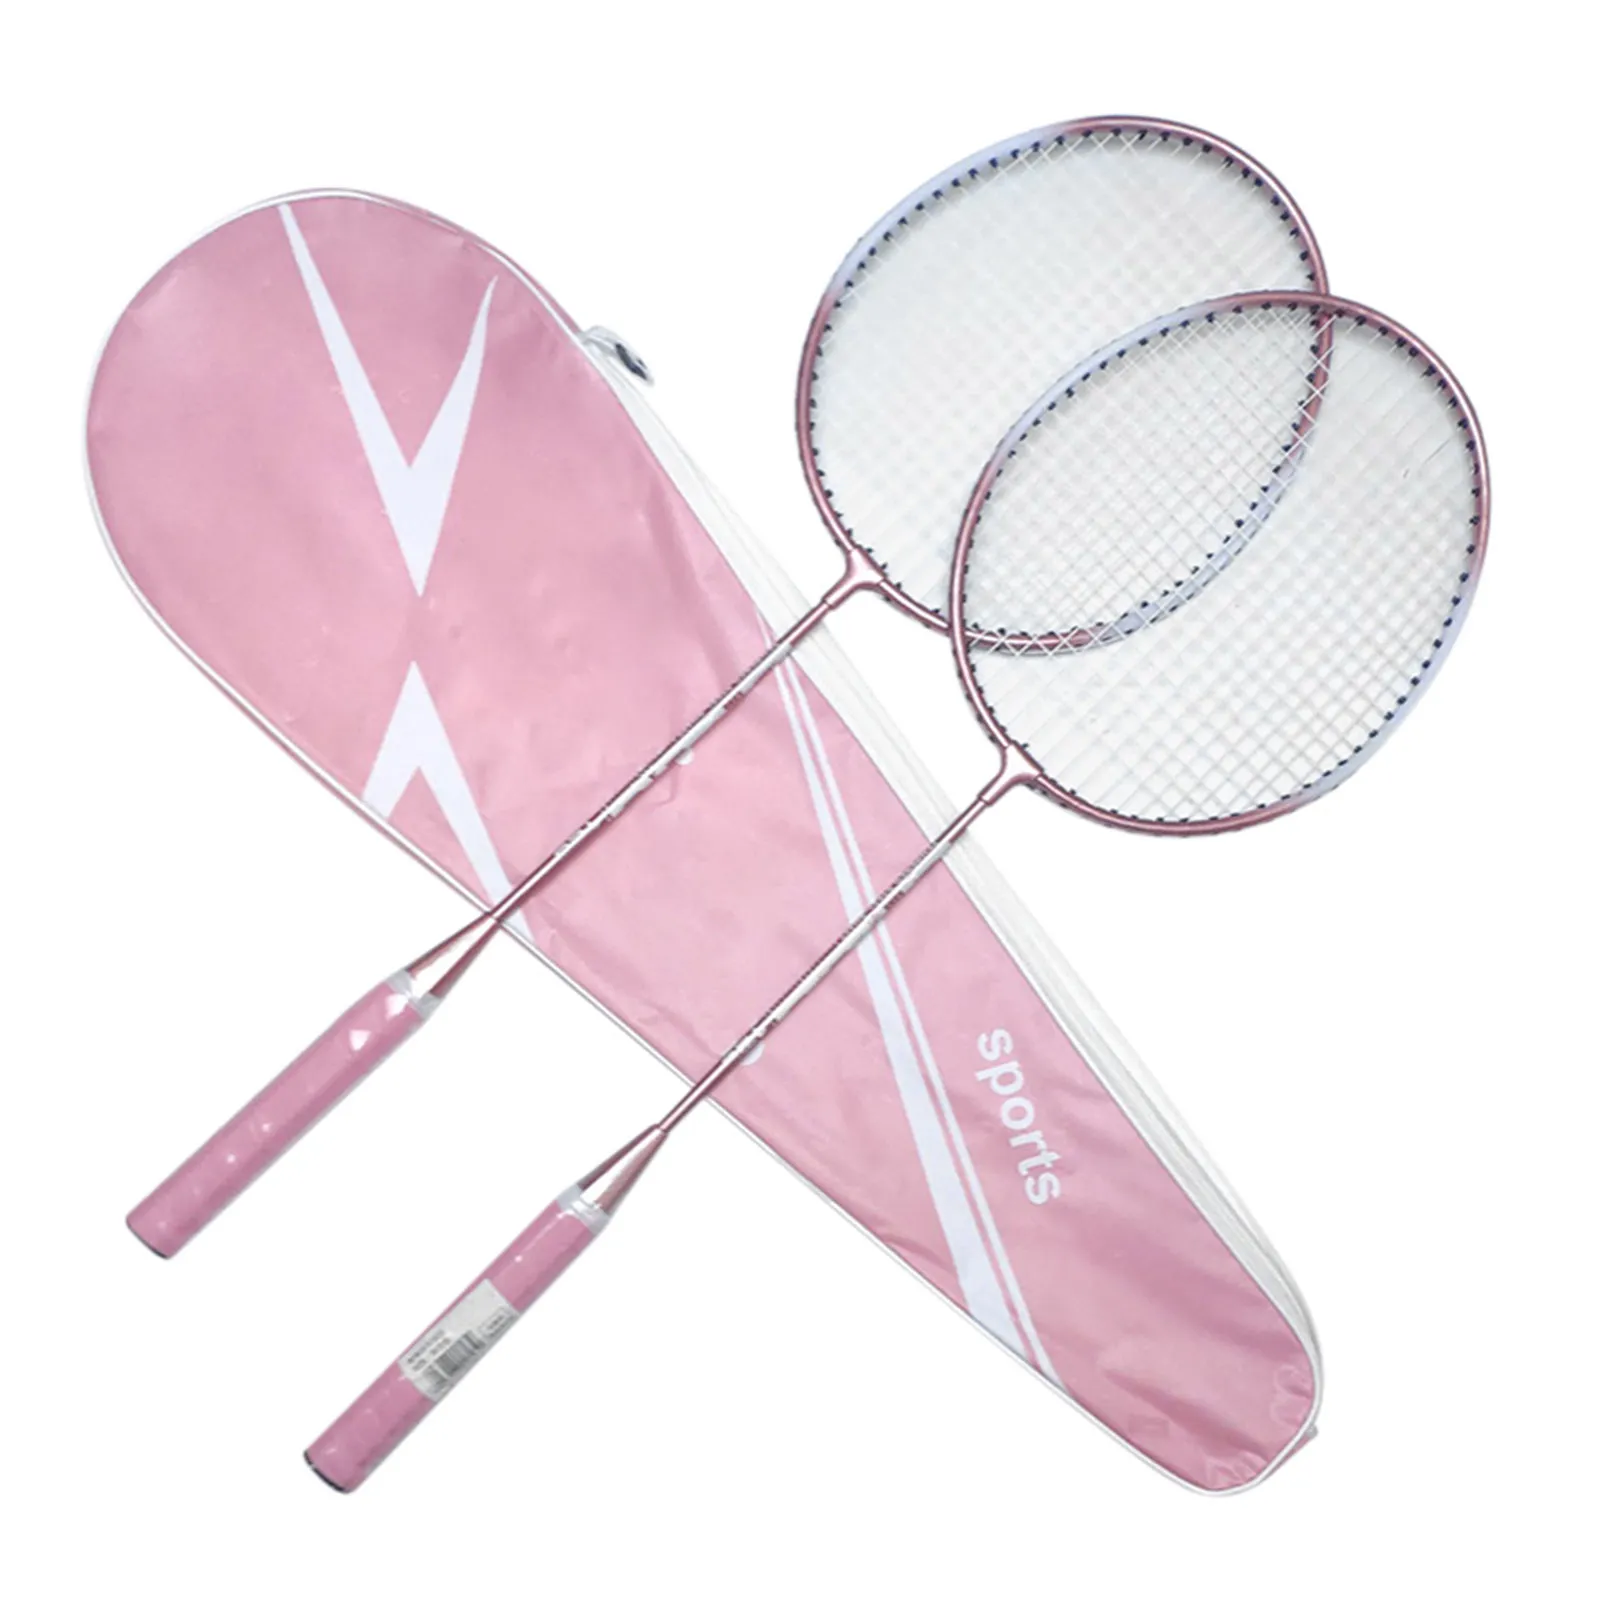 2pcs Badminton Rackets Professional with Carrying ...